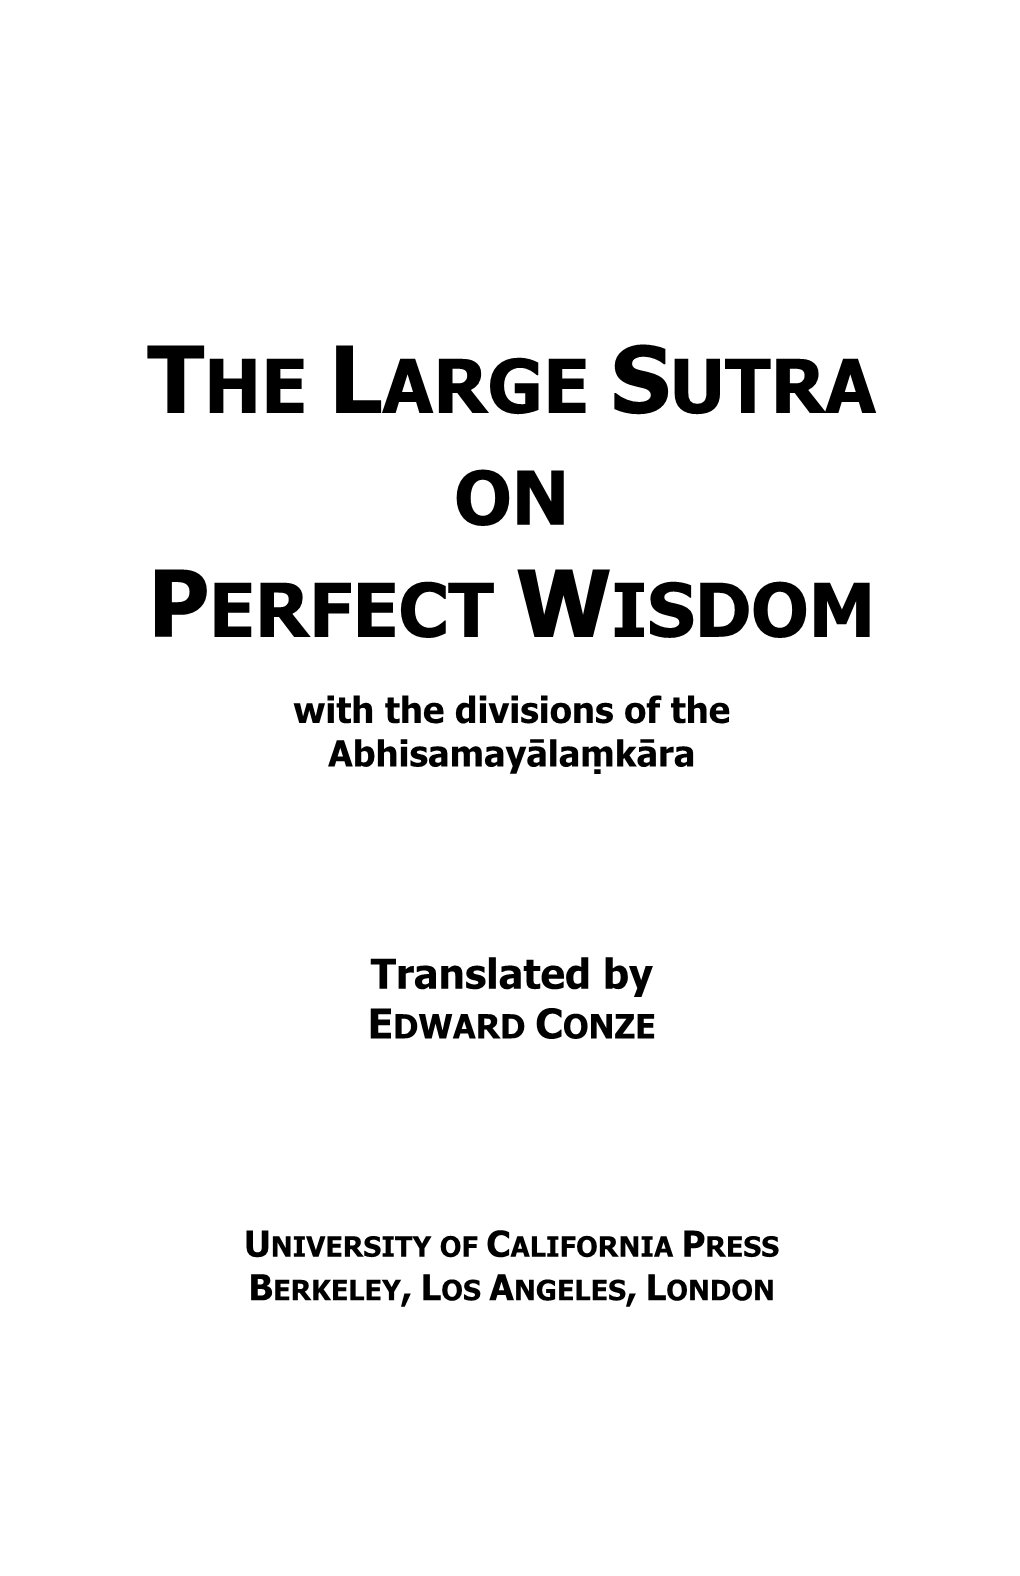 The Large Sutra on Perfect Wisdom